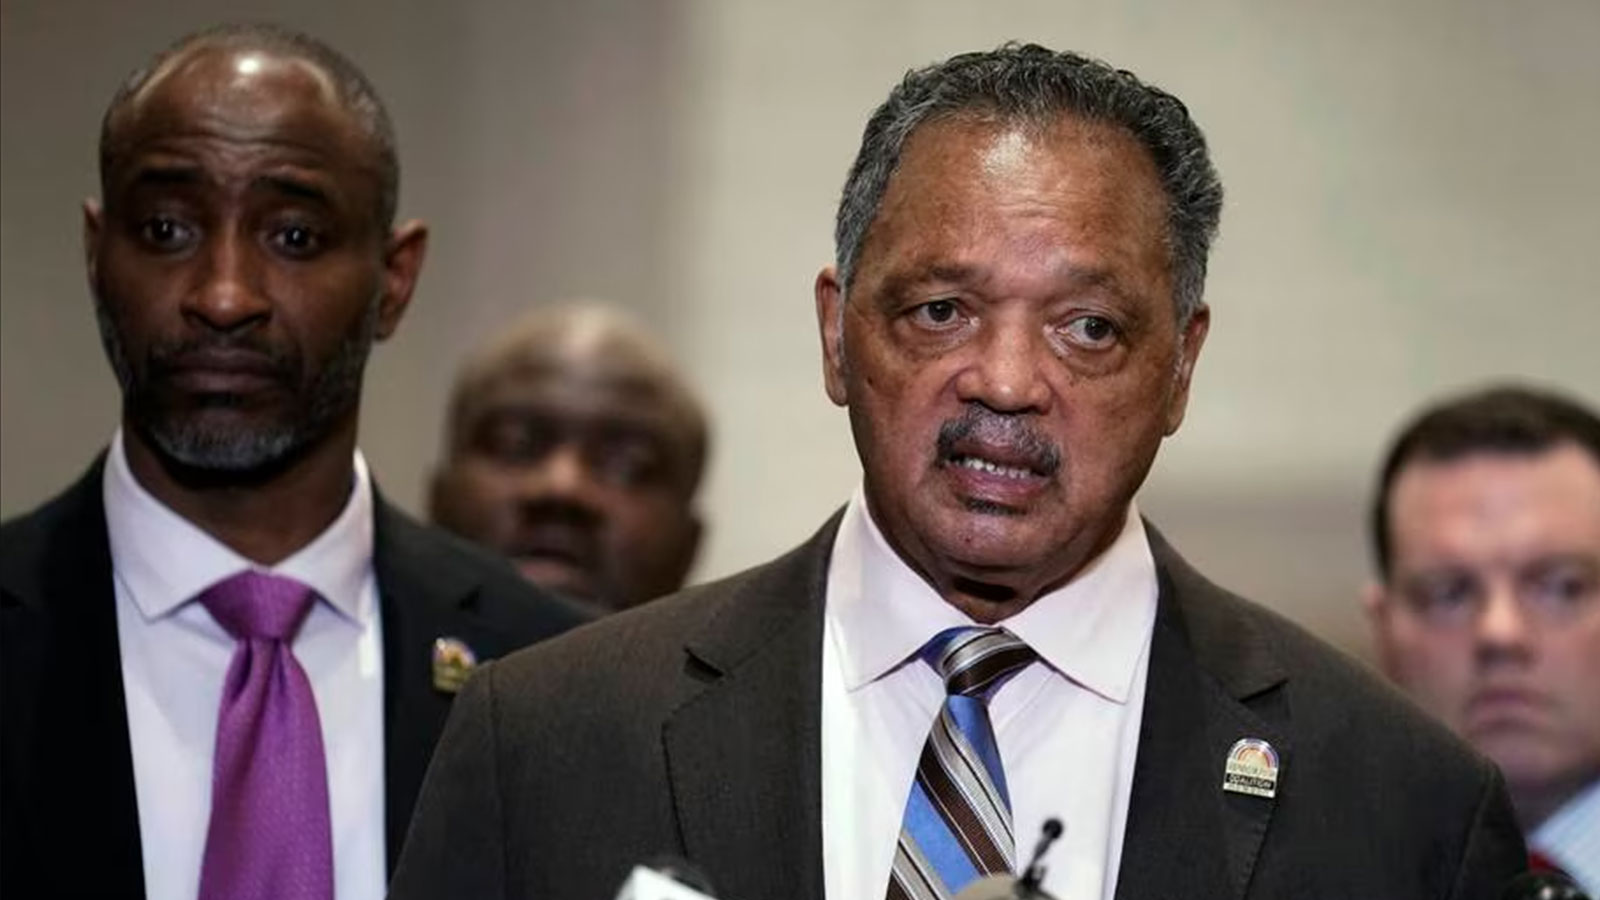 Rev. Jesse Jackson steps down as head of Rainbow/PUSH Coalition civil right group after half-century